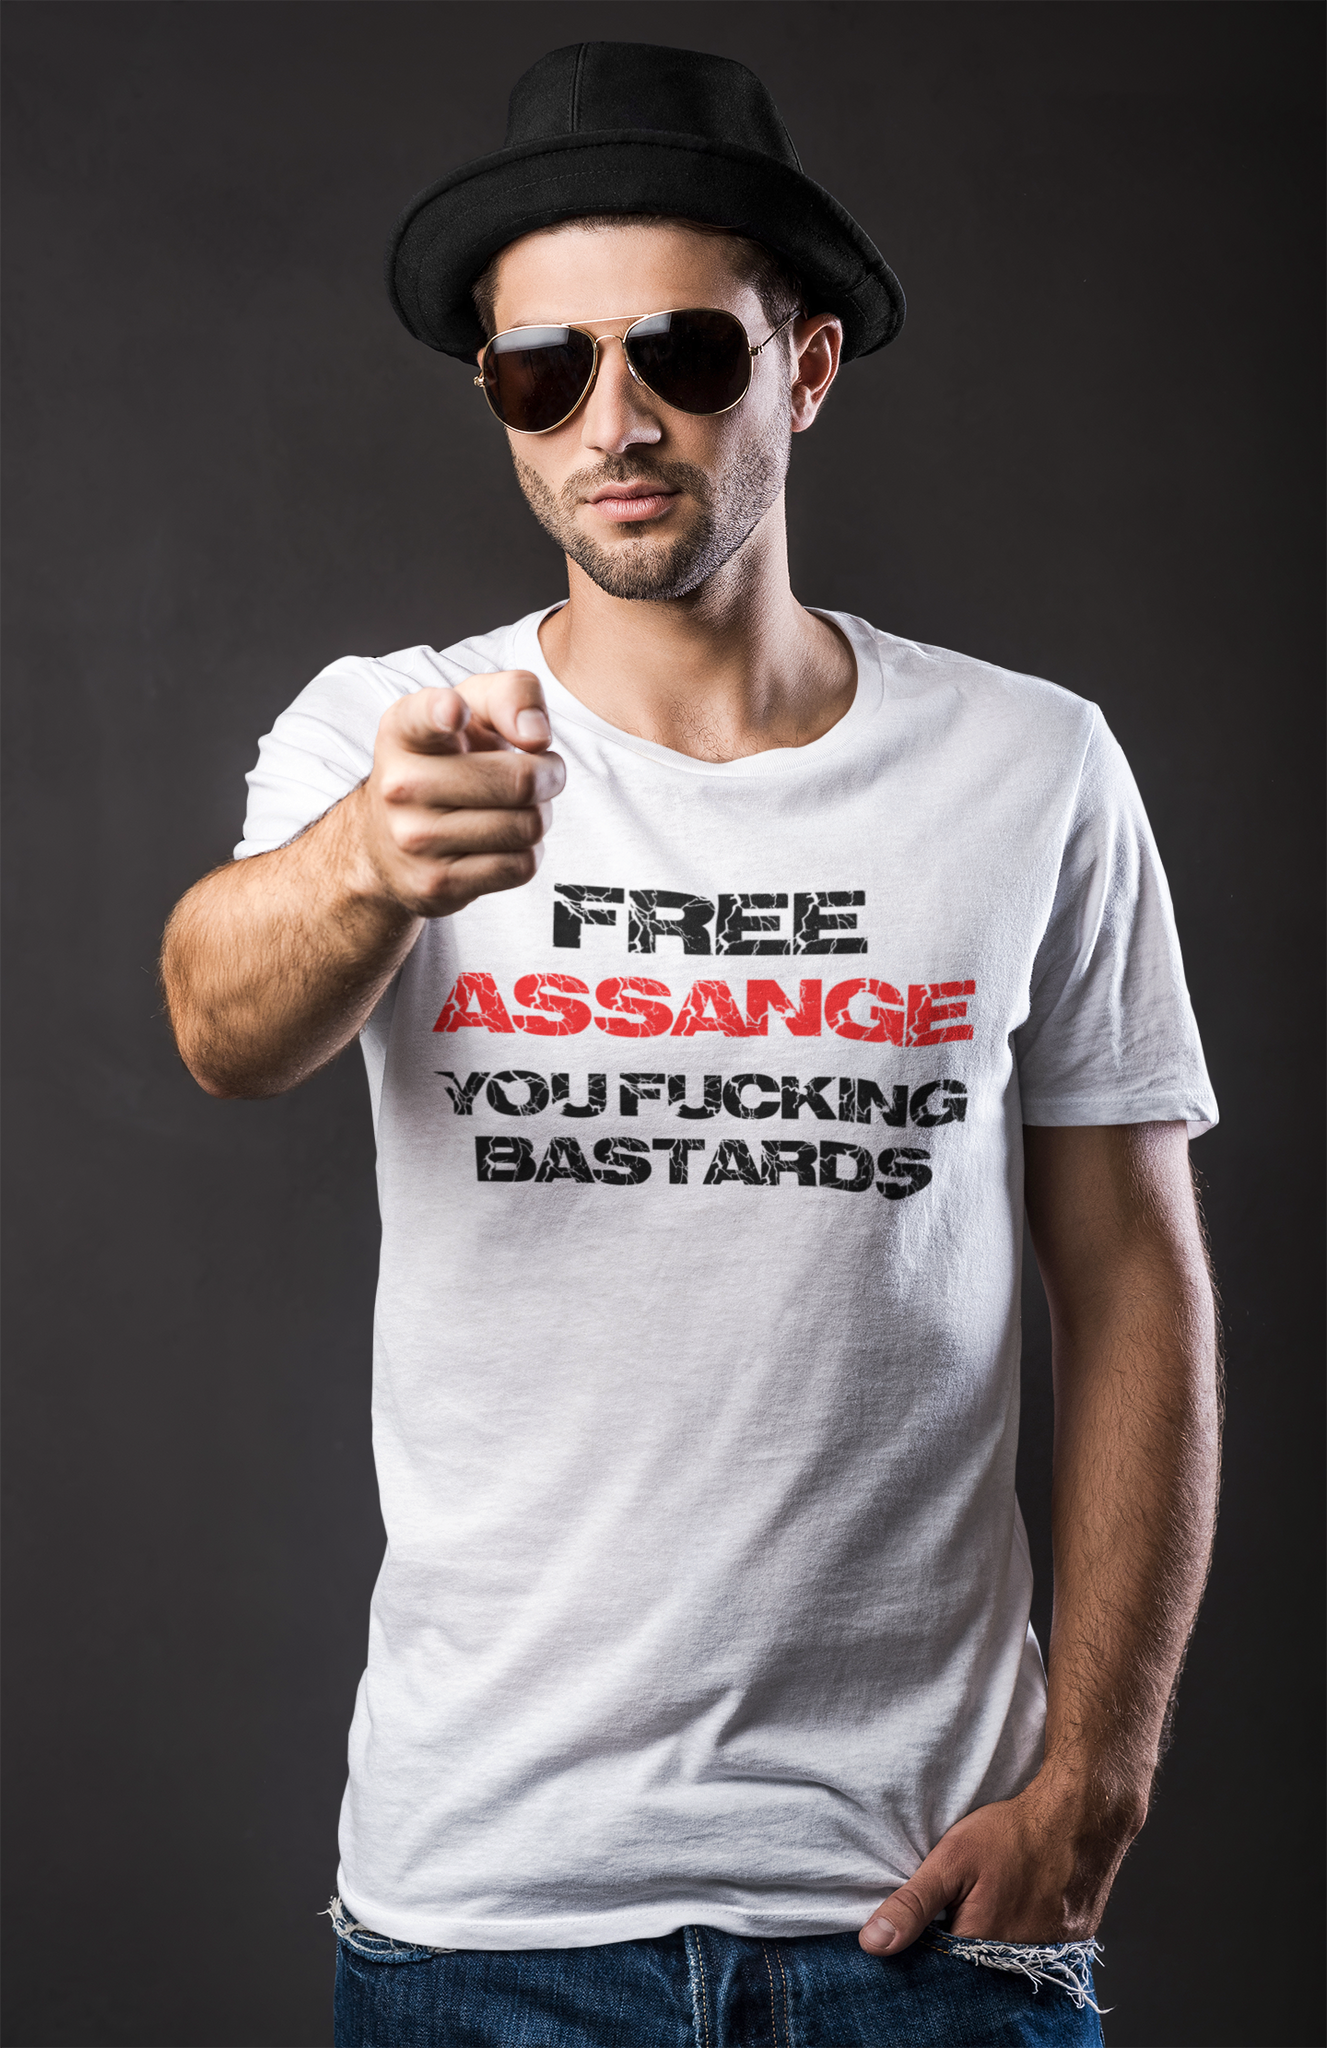 Men's T-shirt in multiple colors with the text "Free Assange" and a message about freedom of speech